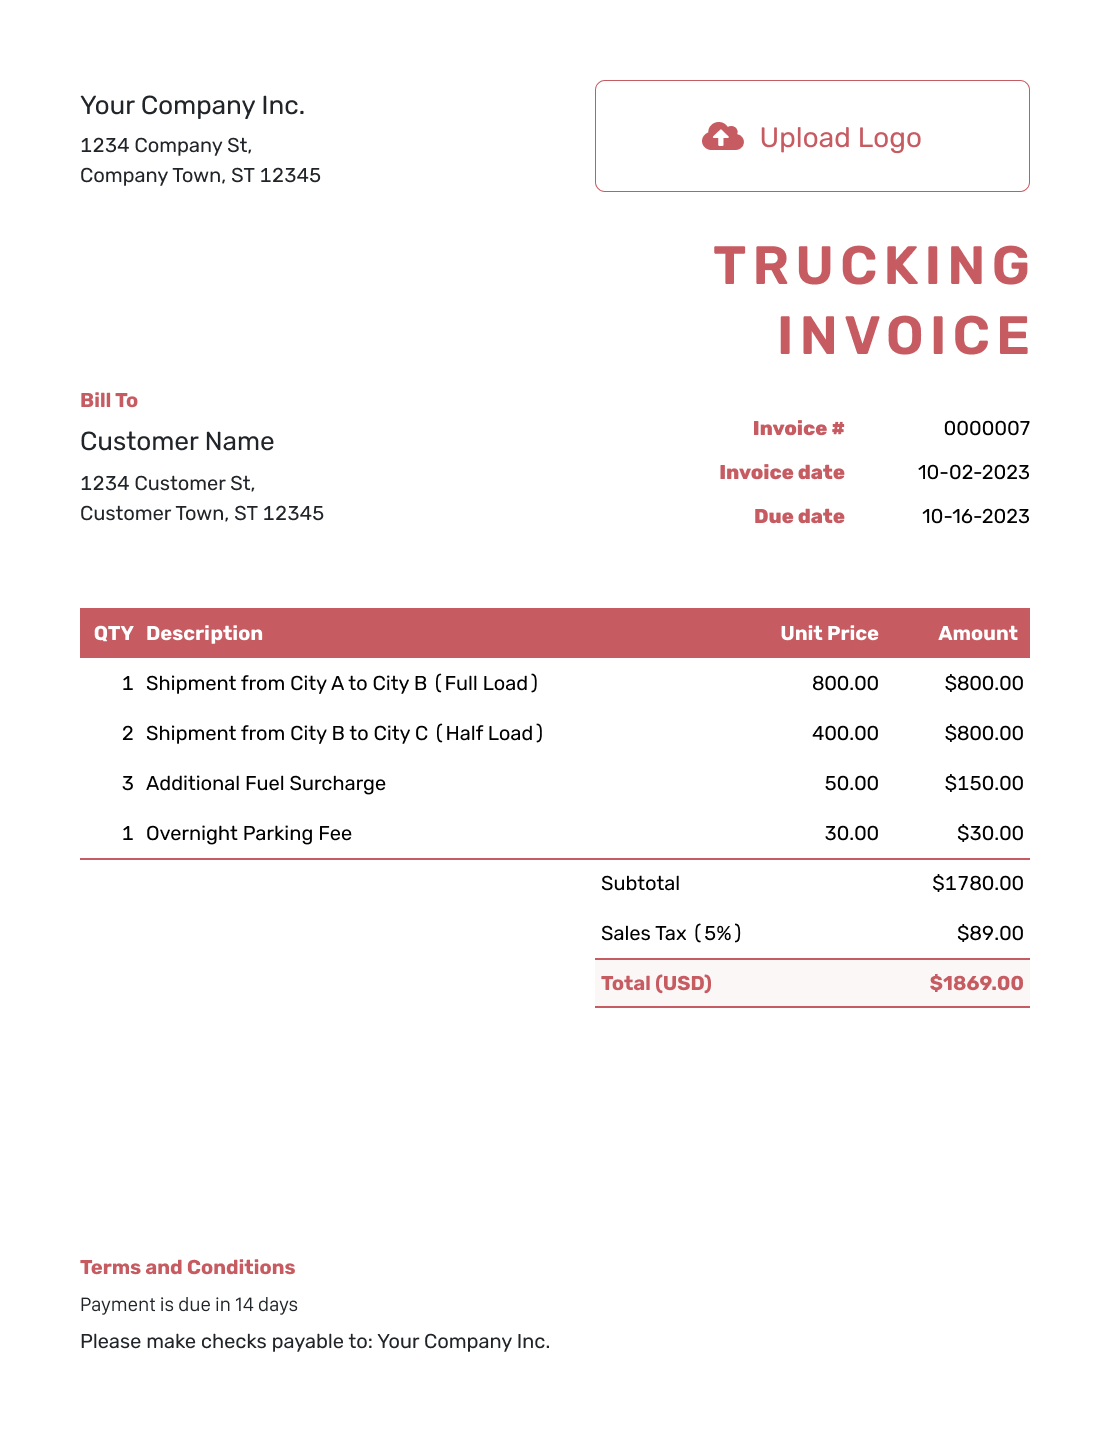 Itemized Trucking Invoice Template